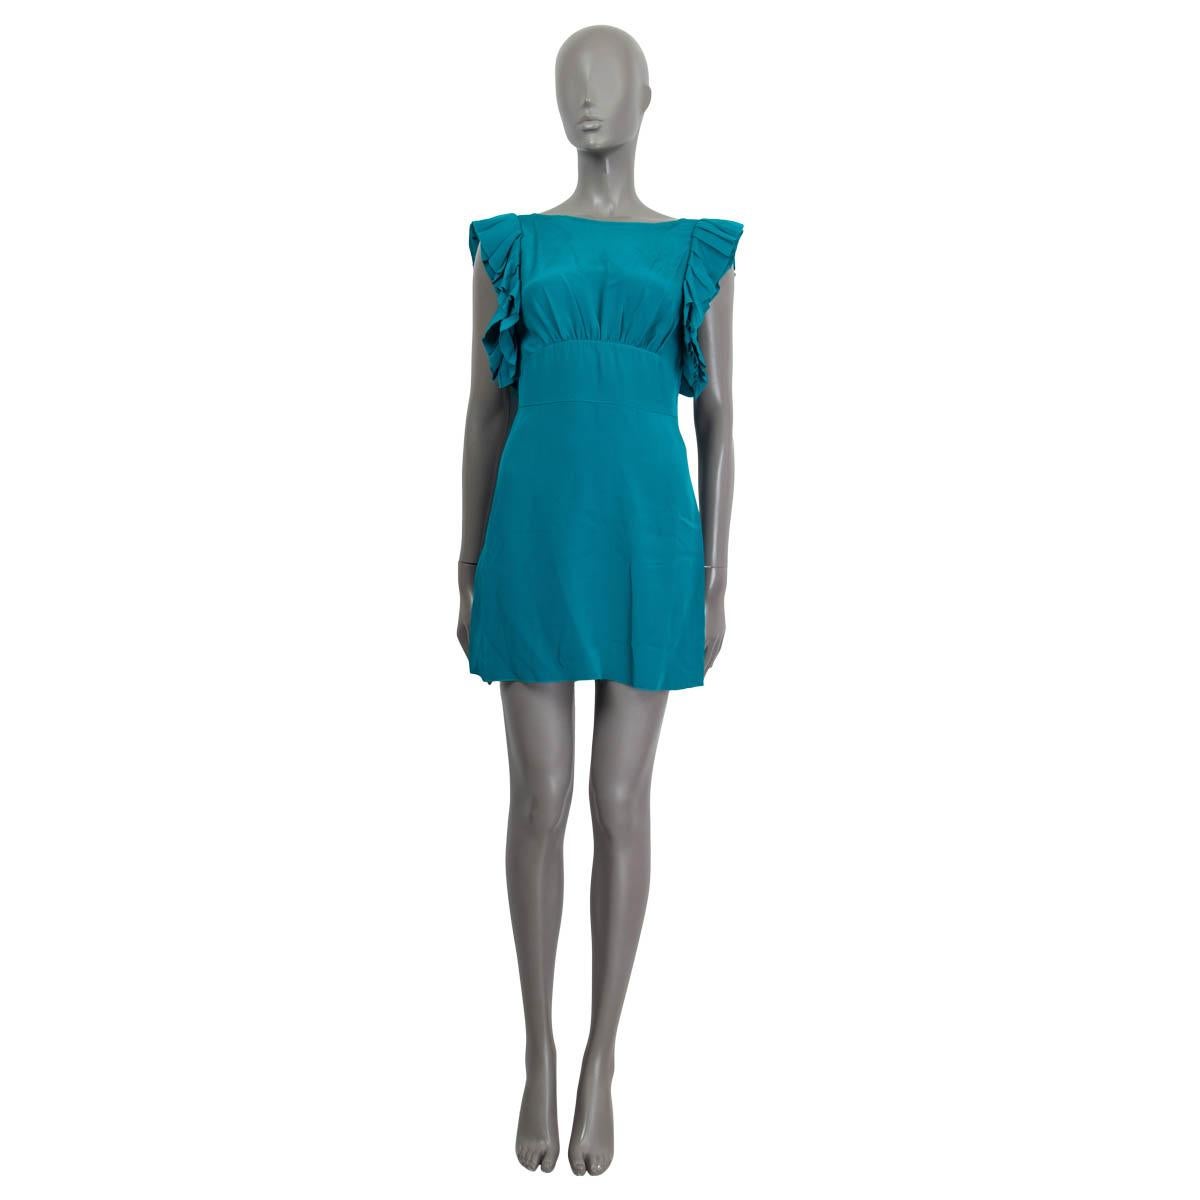 100% authentic Prada mini dress in teal blue silk (100%). Embellished with ruffle-sleeves and a scoop back. Opens with a concealed zipper and a hook on the side. Unlined. Has been worn and is in excellent condition.

Measurements
Tag